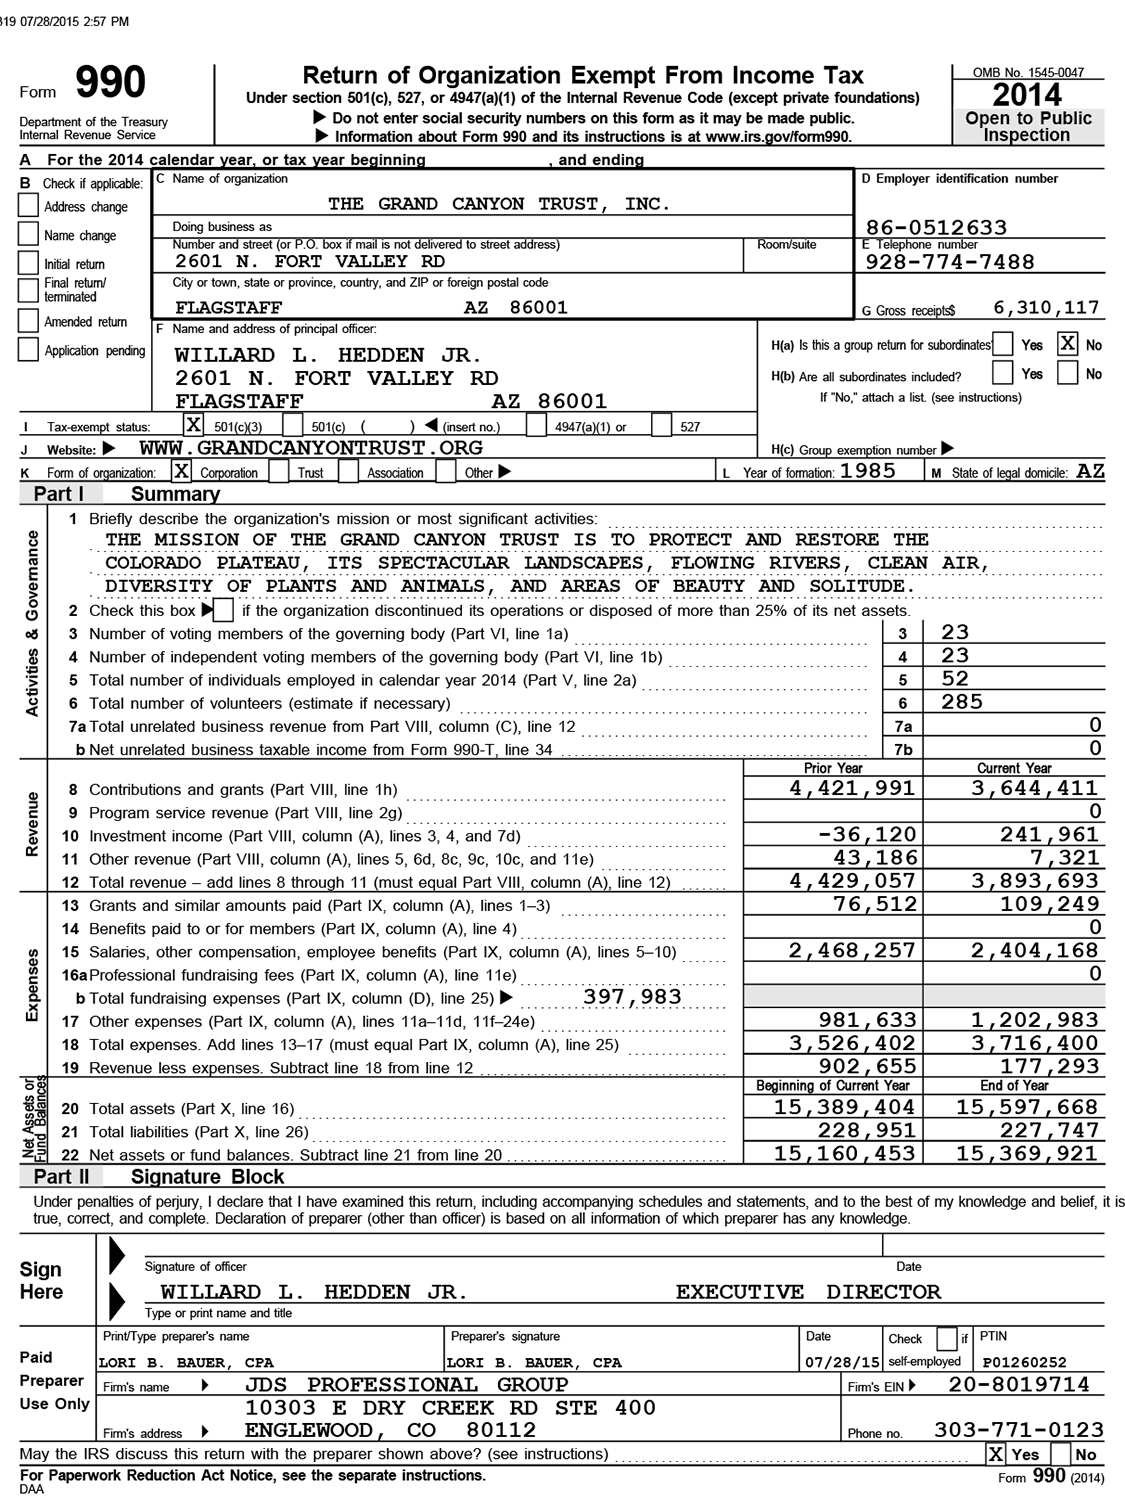 View the Trust's 990 tax form